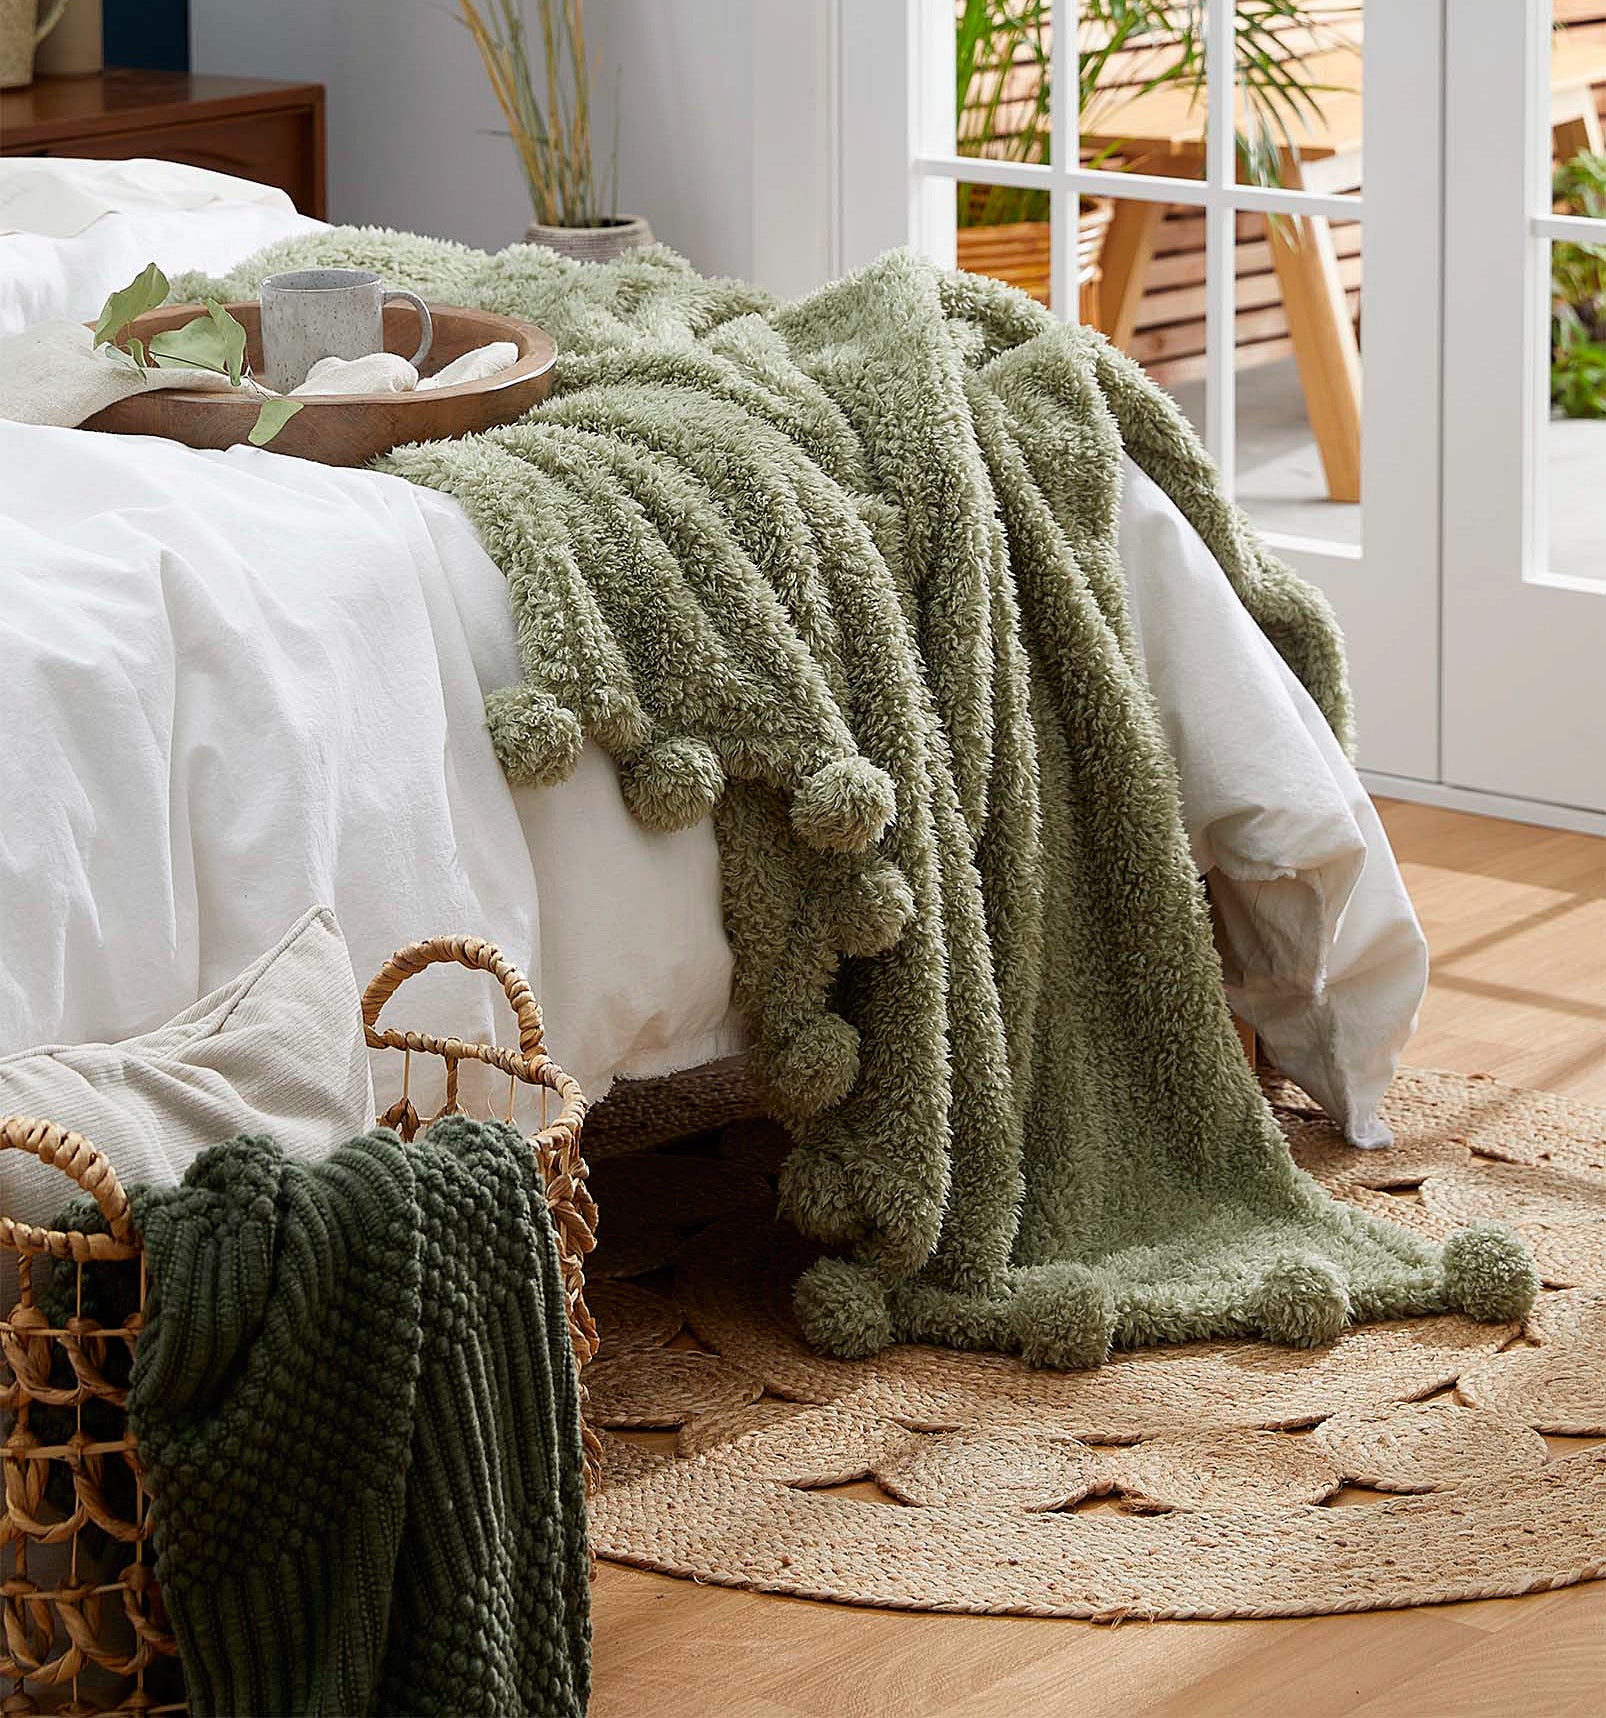 A soft blanket with a pom pom trim on the edge of a bed